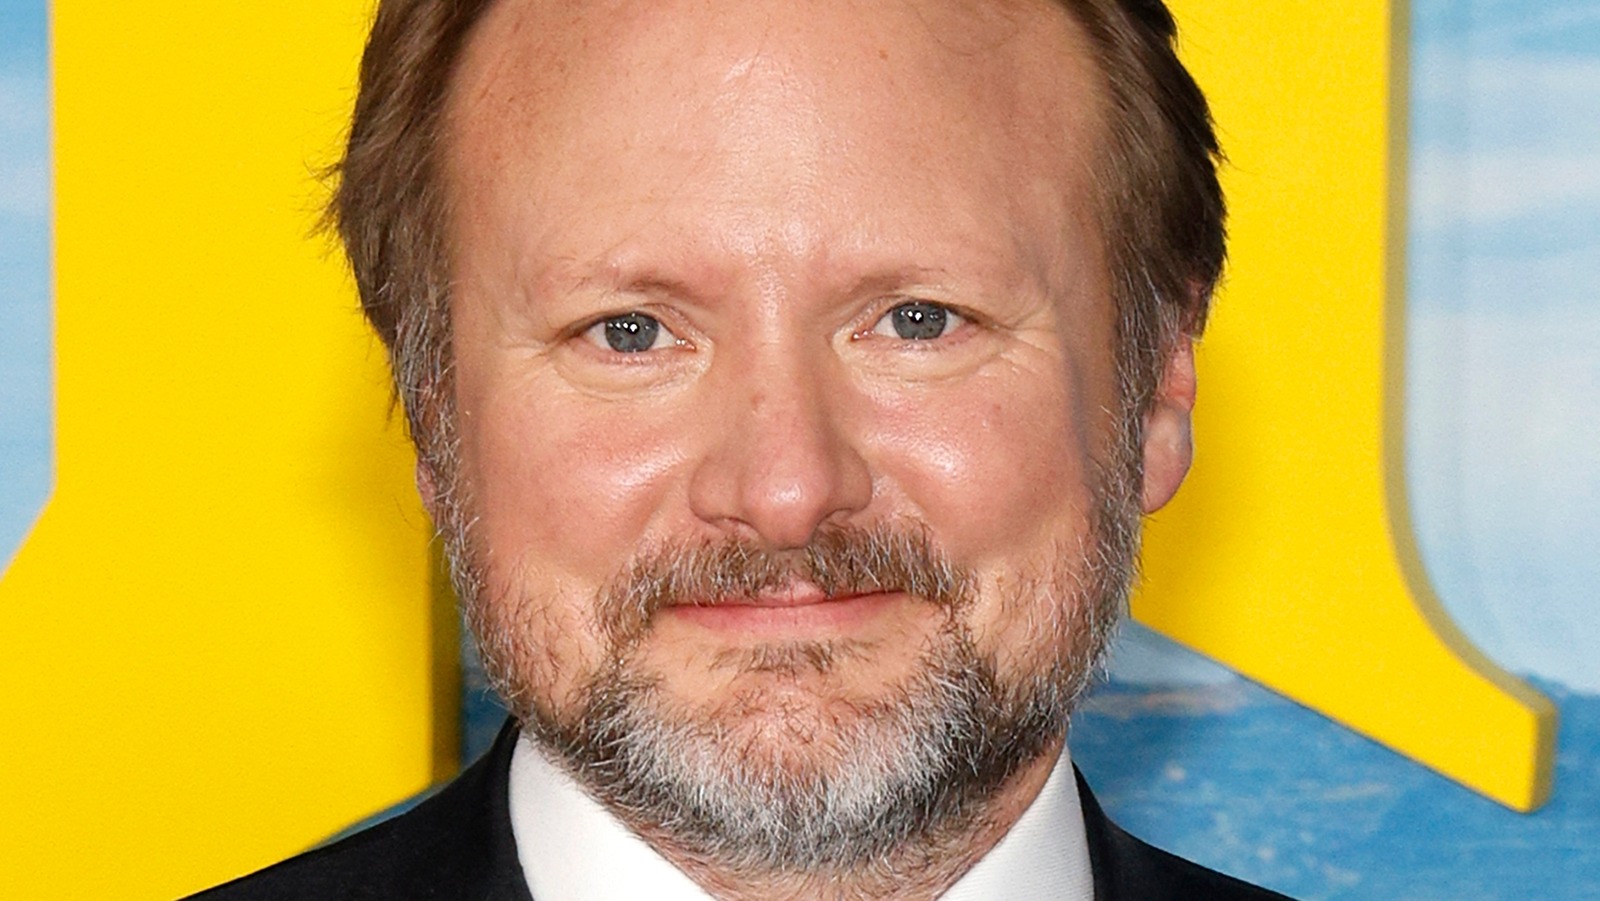 Poker Face: Everything We Know So Far About The Rian Johnson